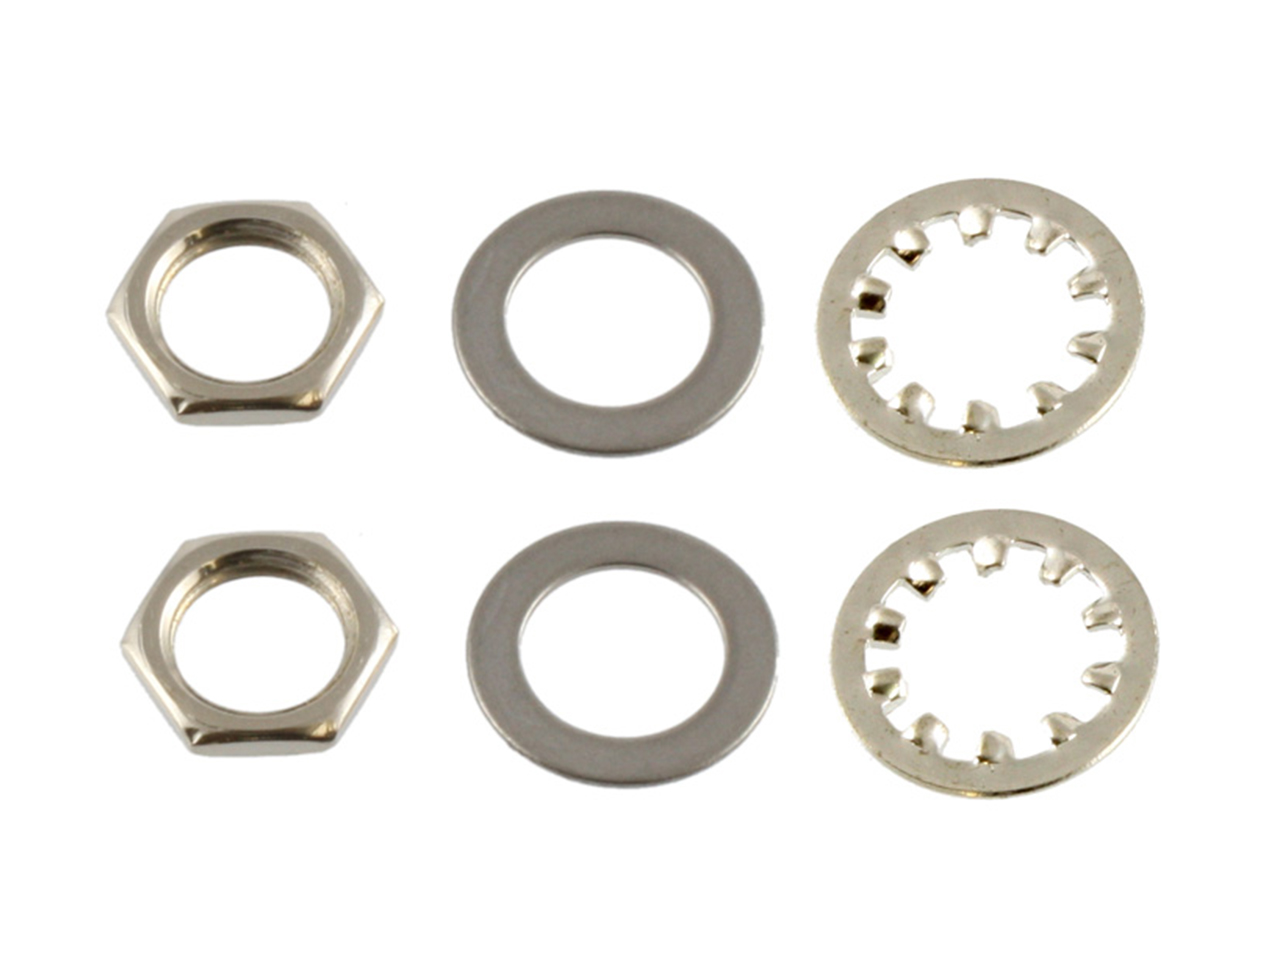 Allparts(オールパーツ) EP-4970-000 / Nuts and Washers for USA Pots and Jacks (ポット,ジャック用ワッシャー)